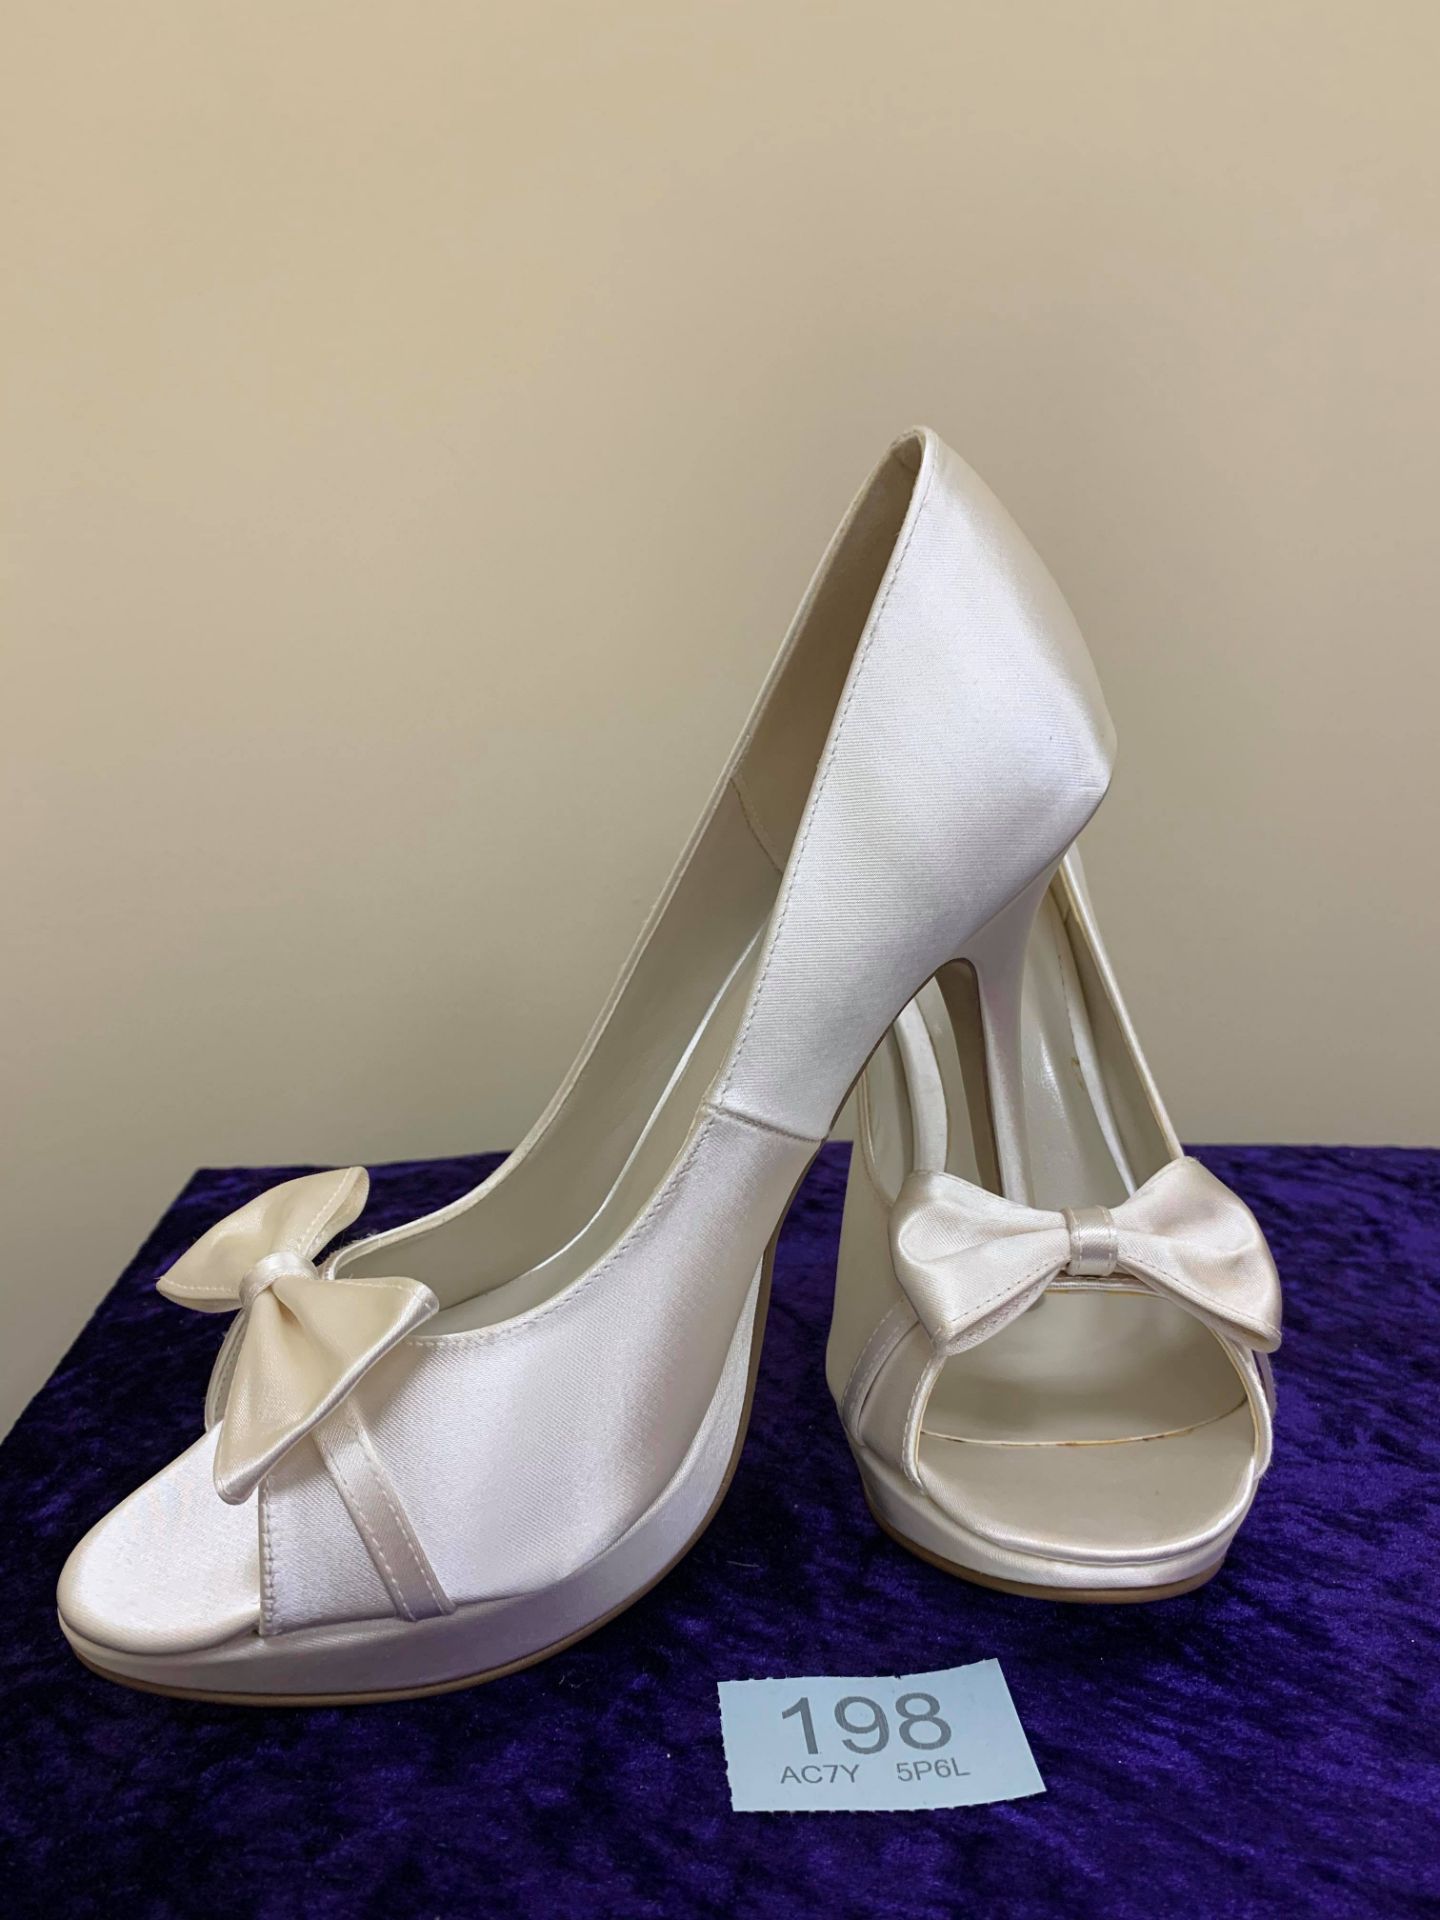 Designer Shoes Ivory In Size 40. Code 198